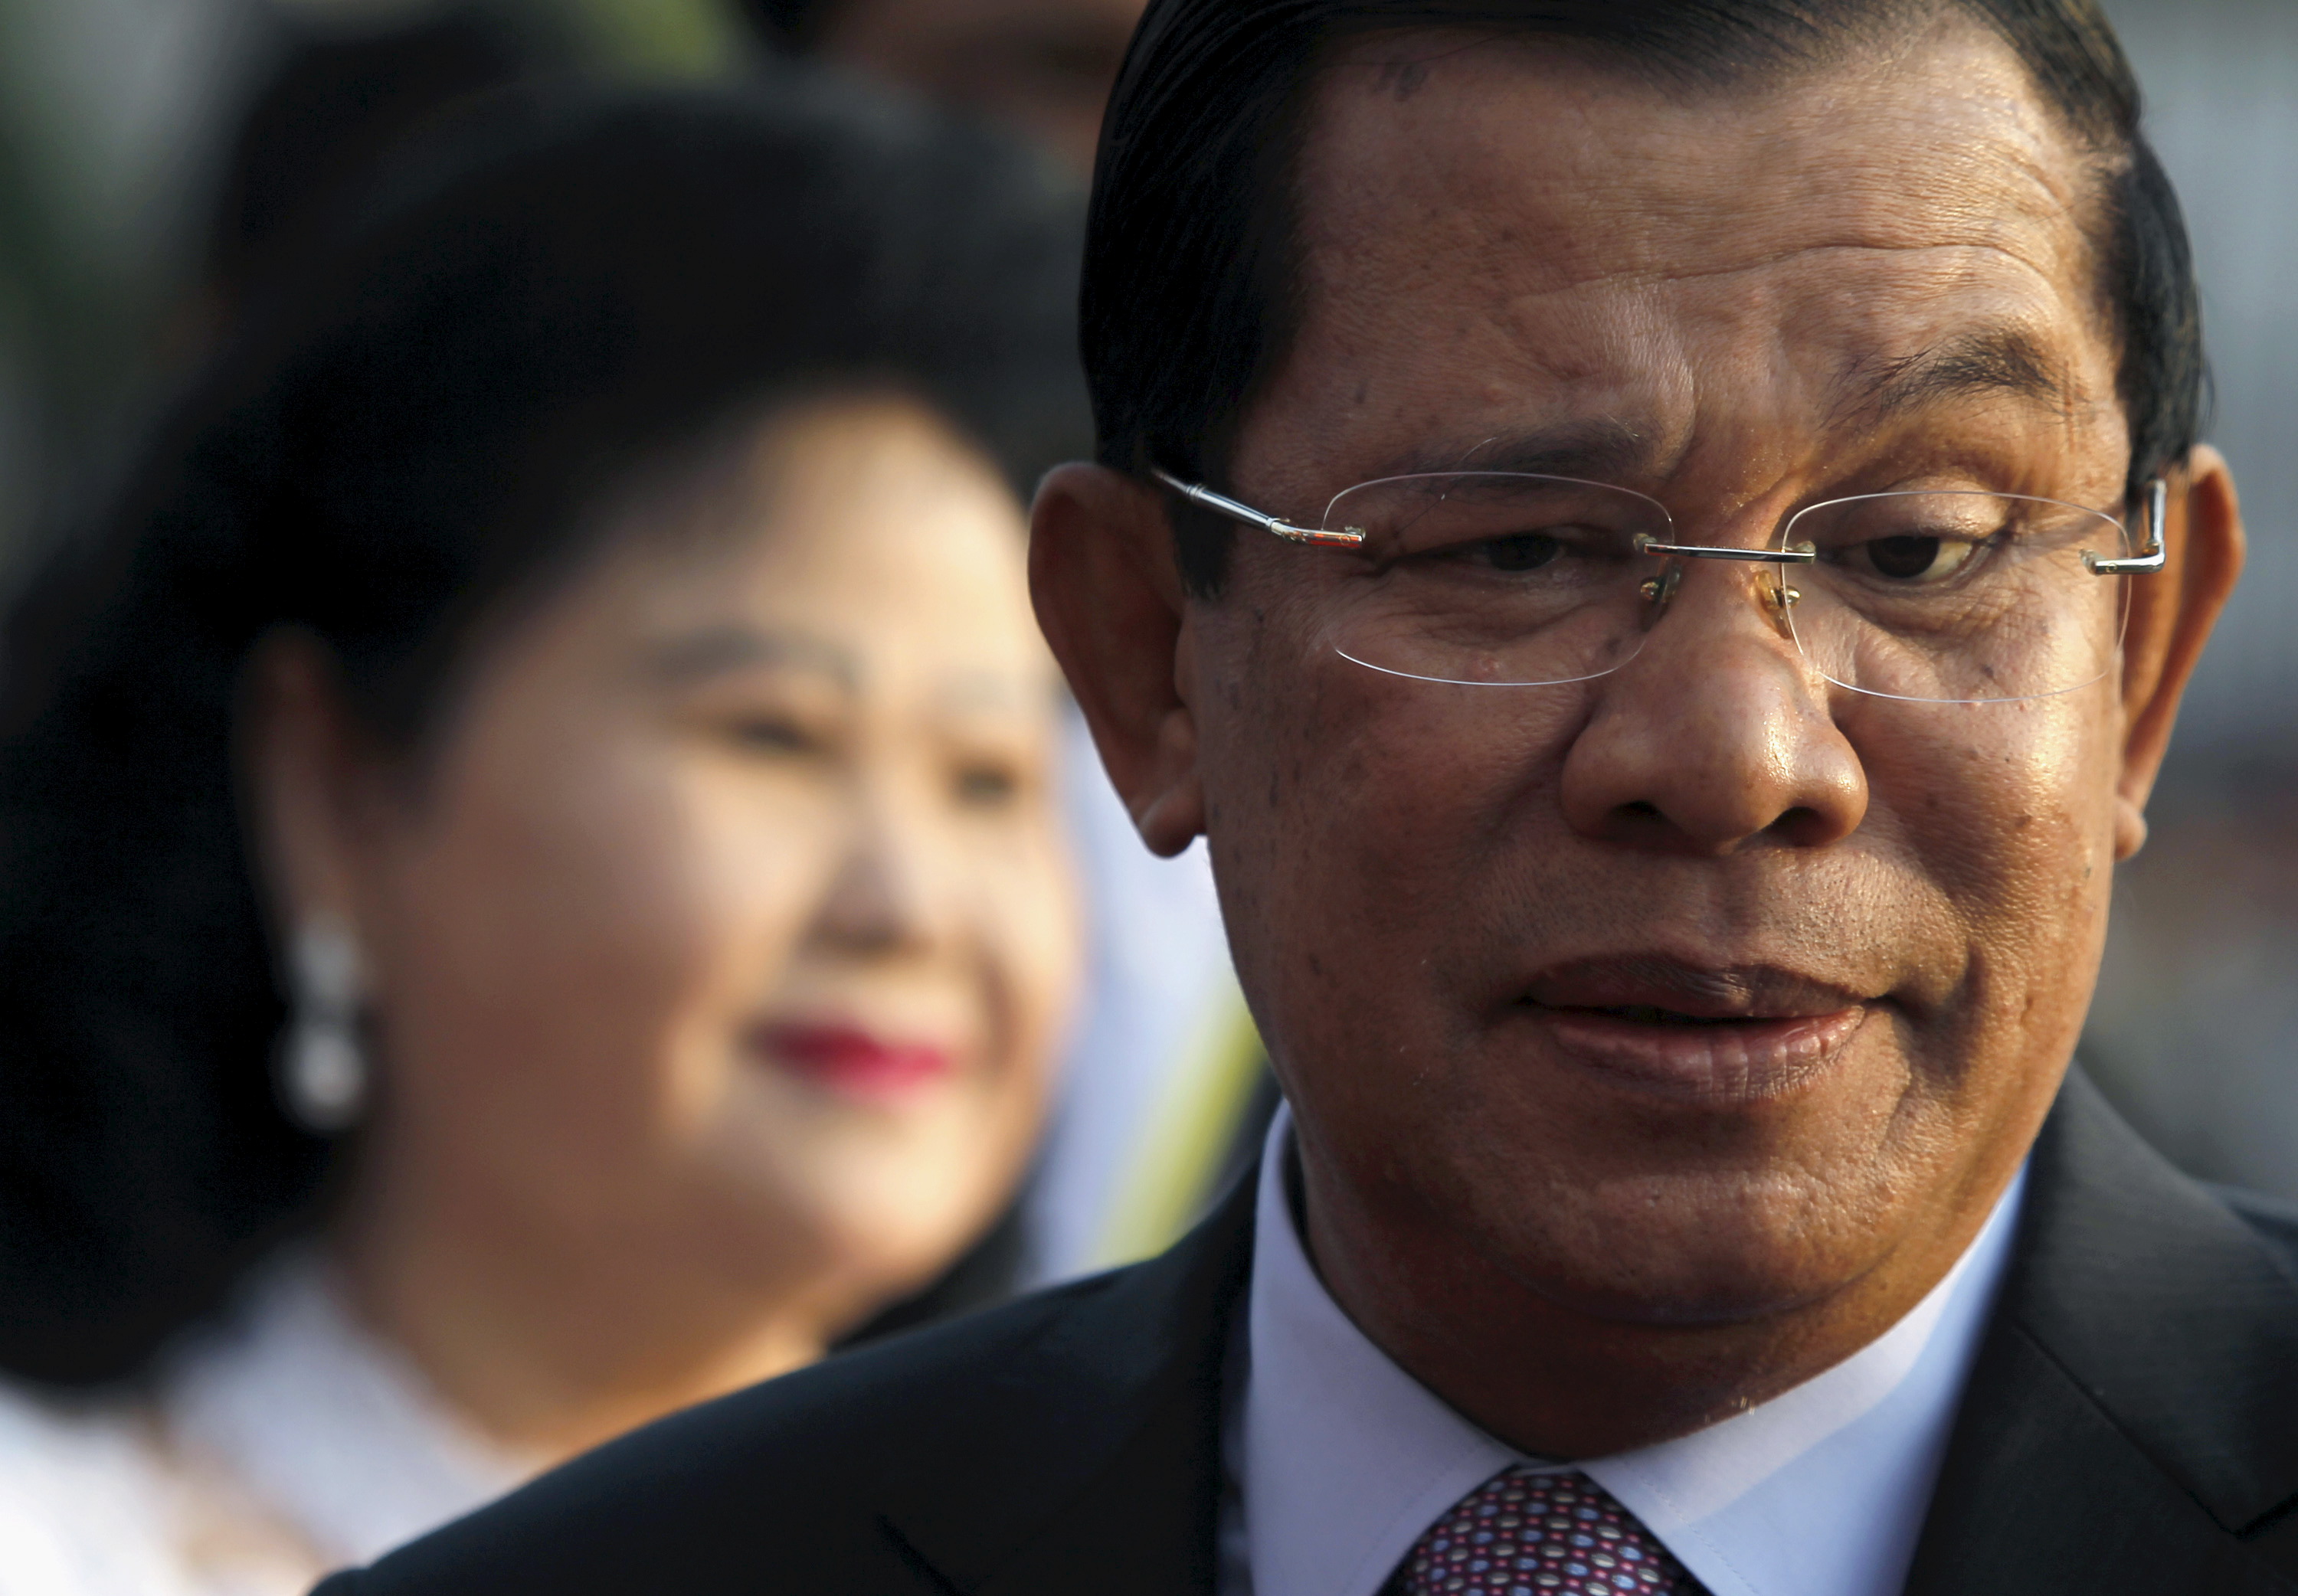 Cambodian Prime Minister Hun Sen and his wife Bun Rany smile during a ceremony in Phnom Penh on Jan. 7, 2016 (Pring Samrang—Reuters)